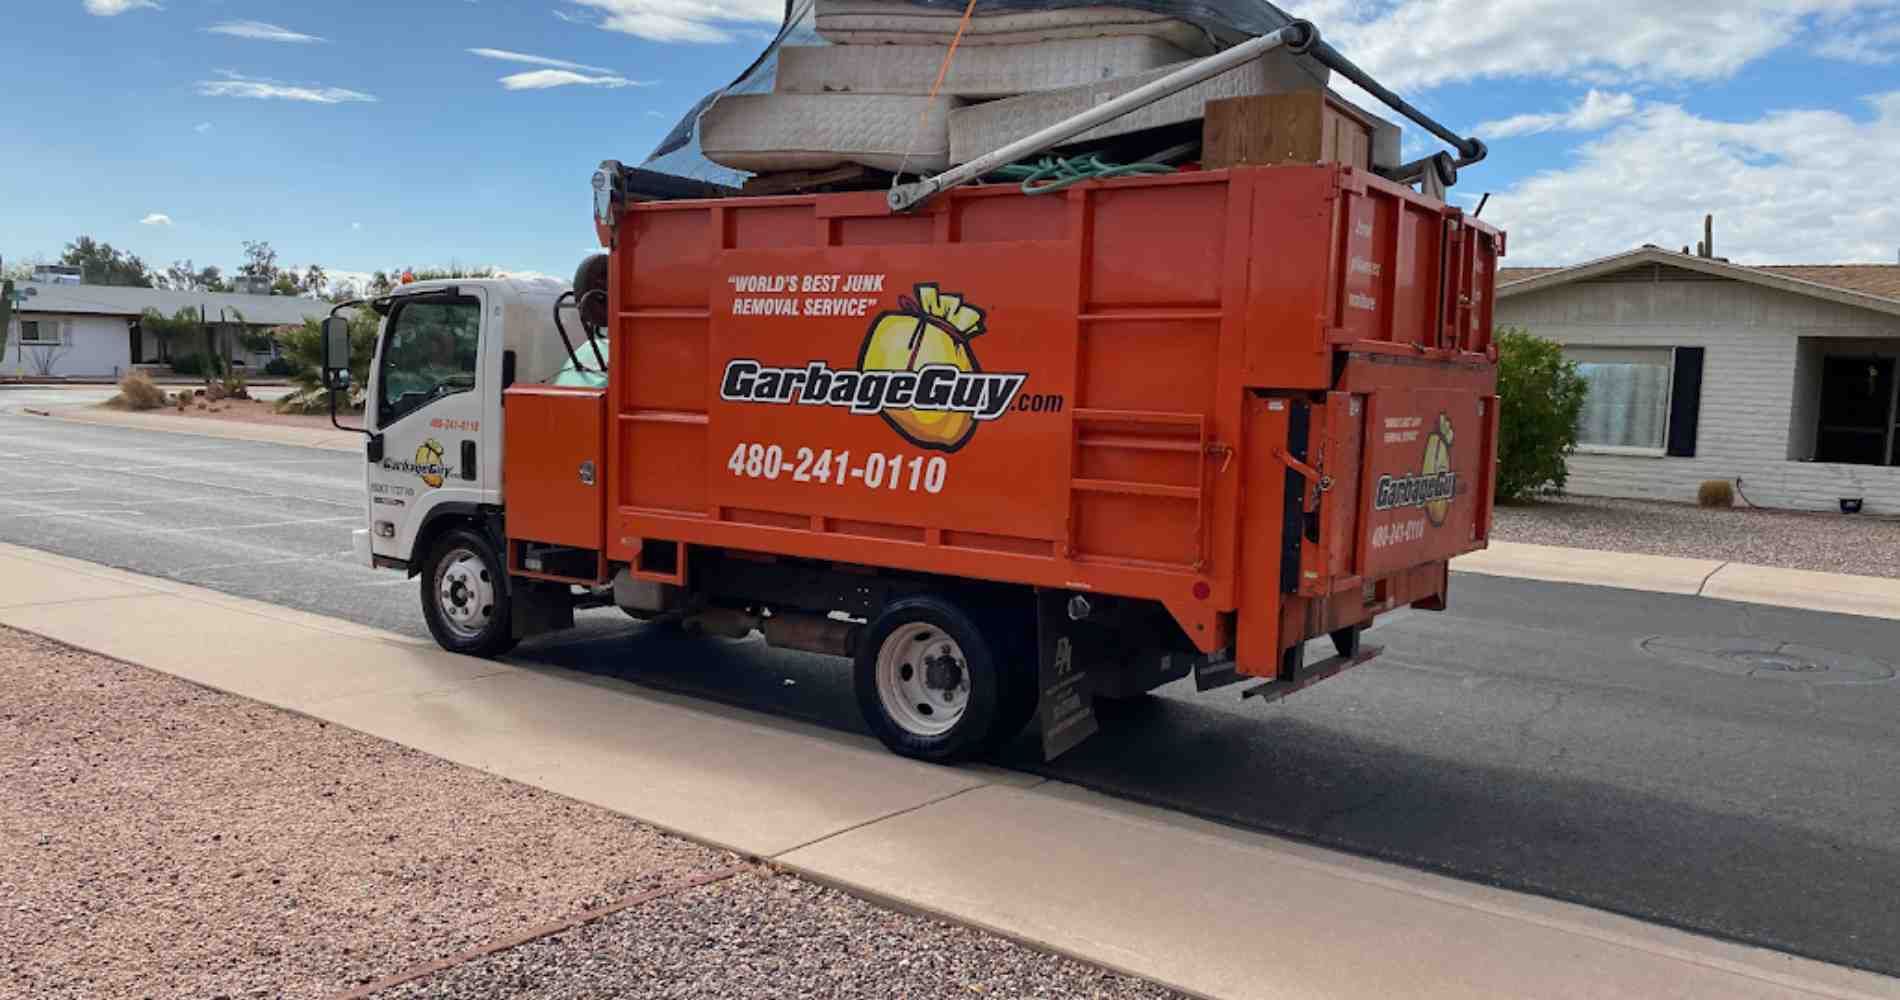 #1 for Curbside Trash Pickup in Phoenix, AZ with Over 1200 5-Star Reviews!